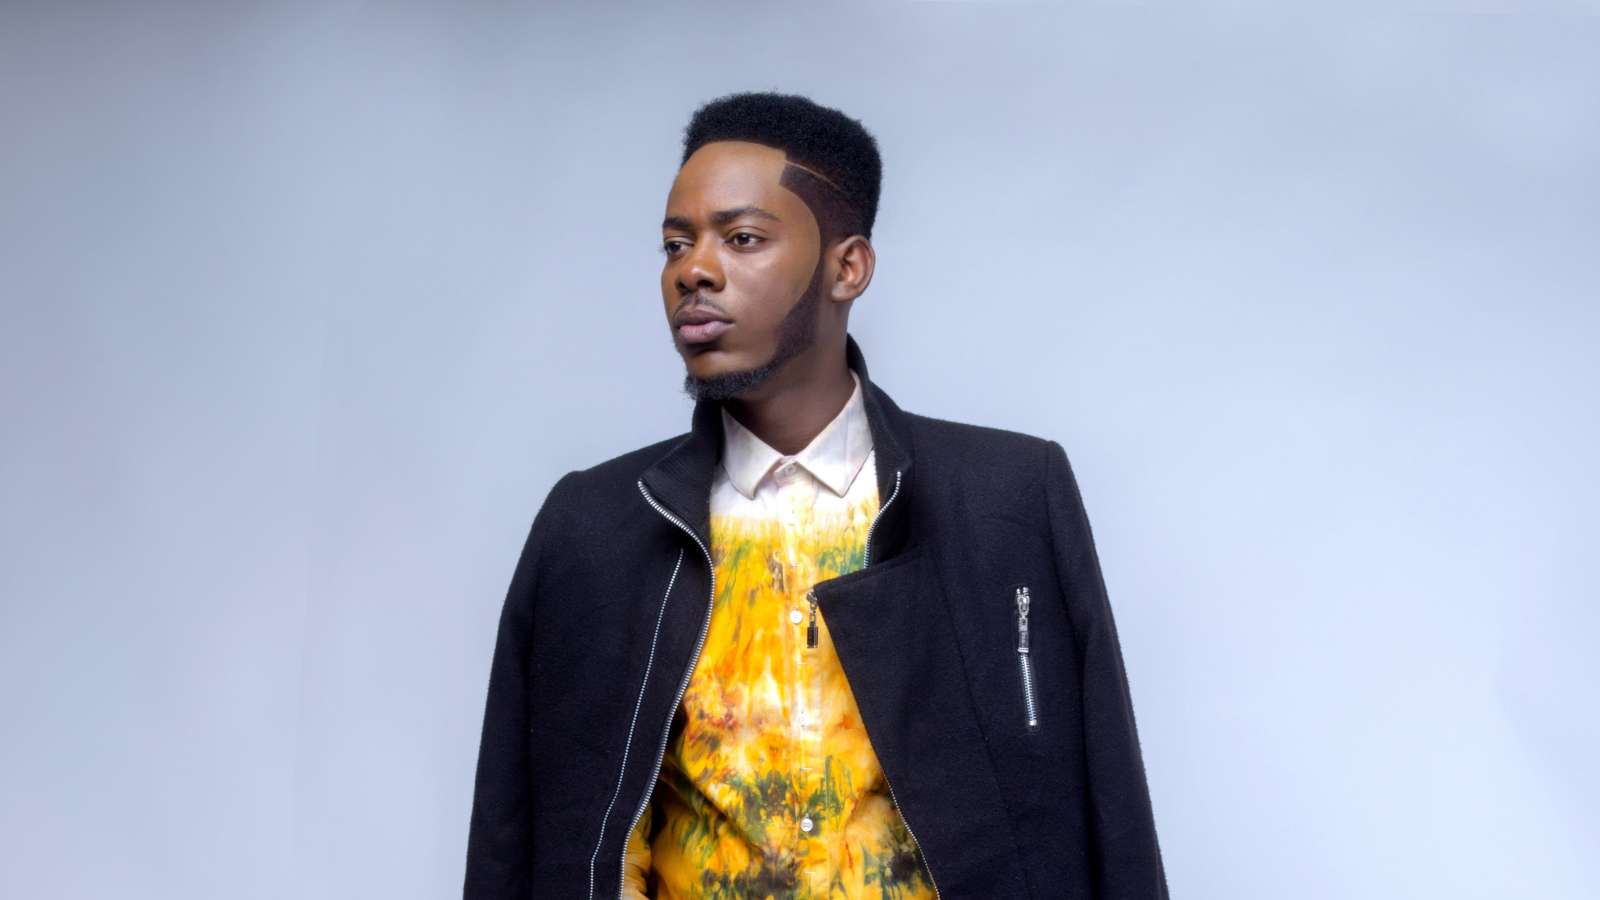 Adekunle Gold: Biography, Net Worth and 25 Things You Never Knew About Him